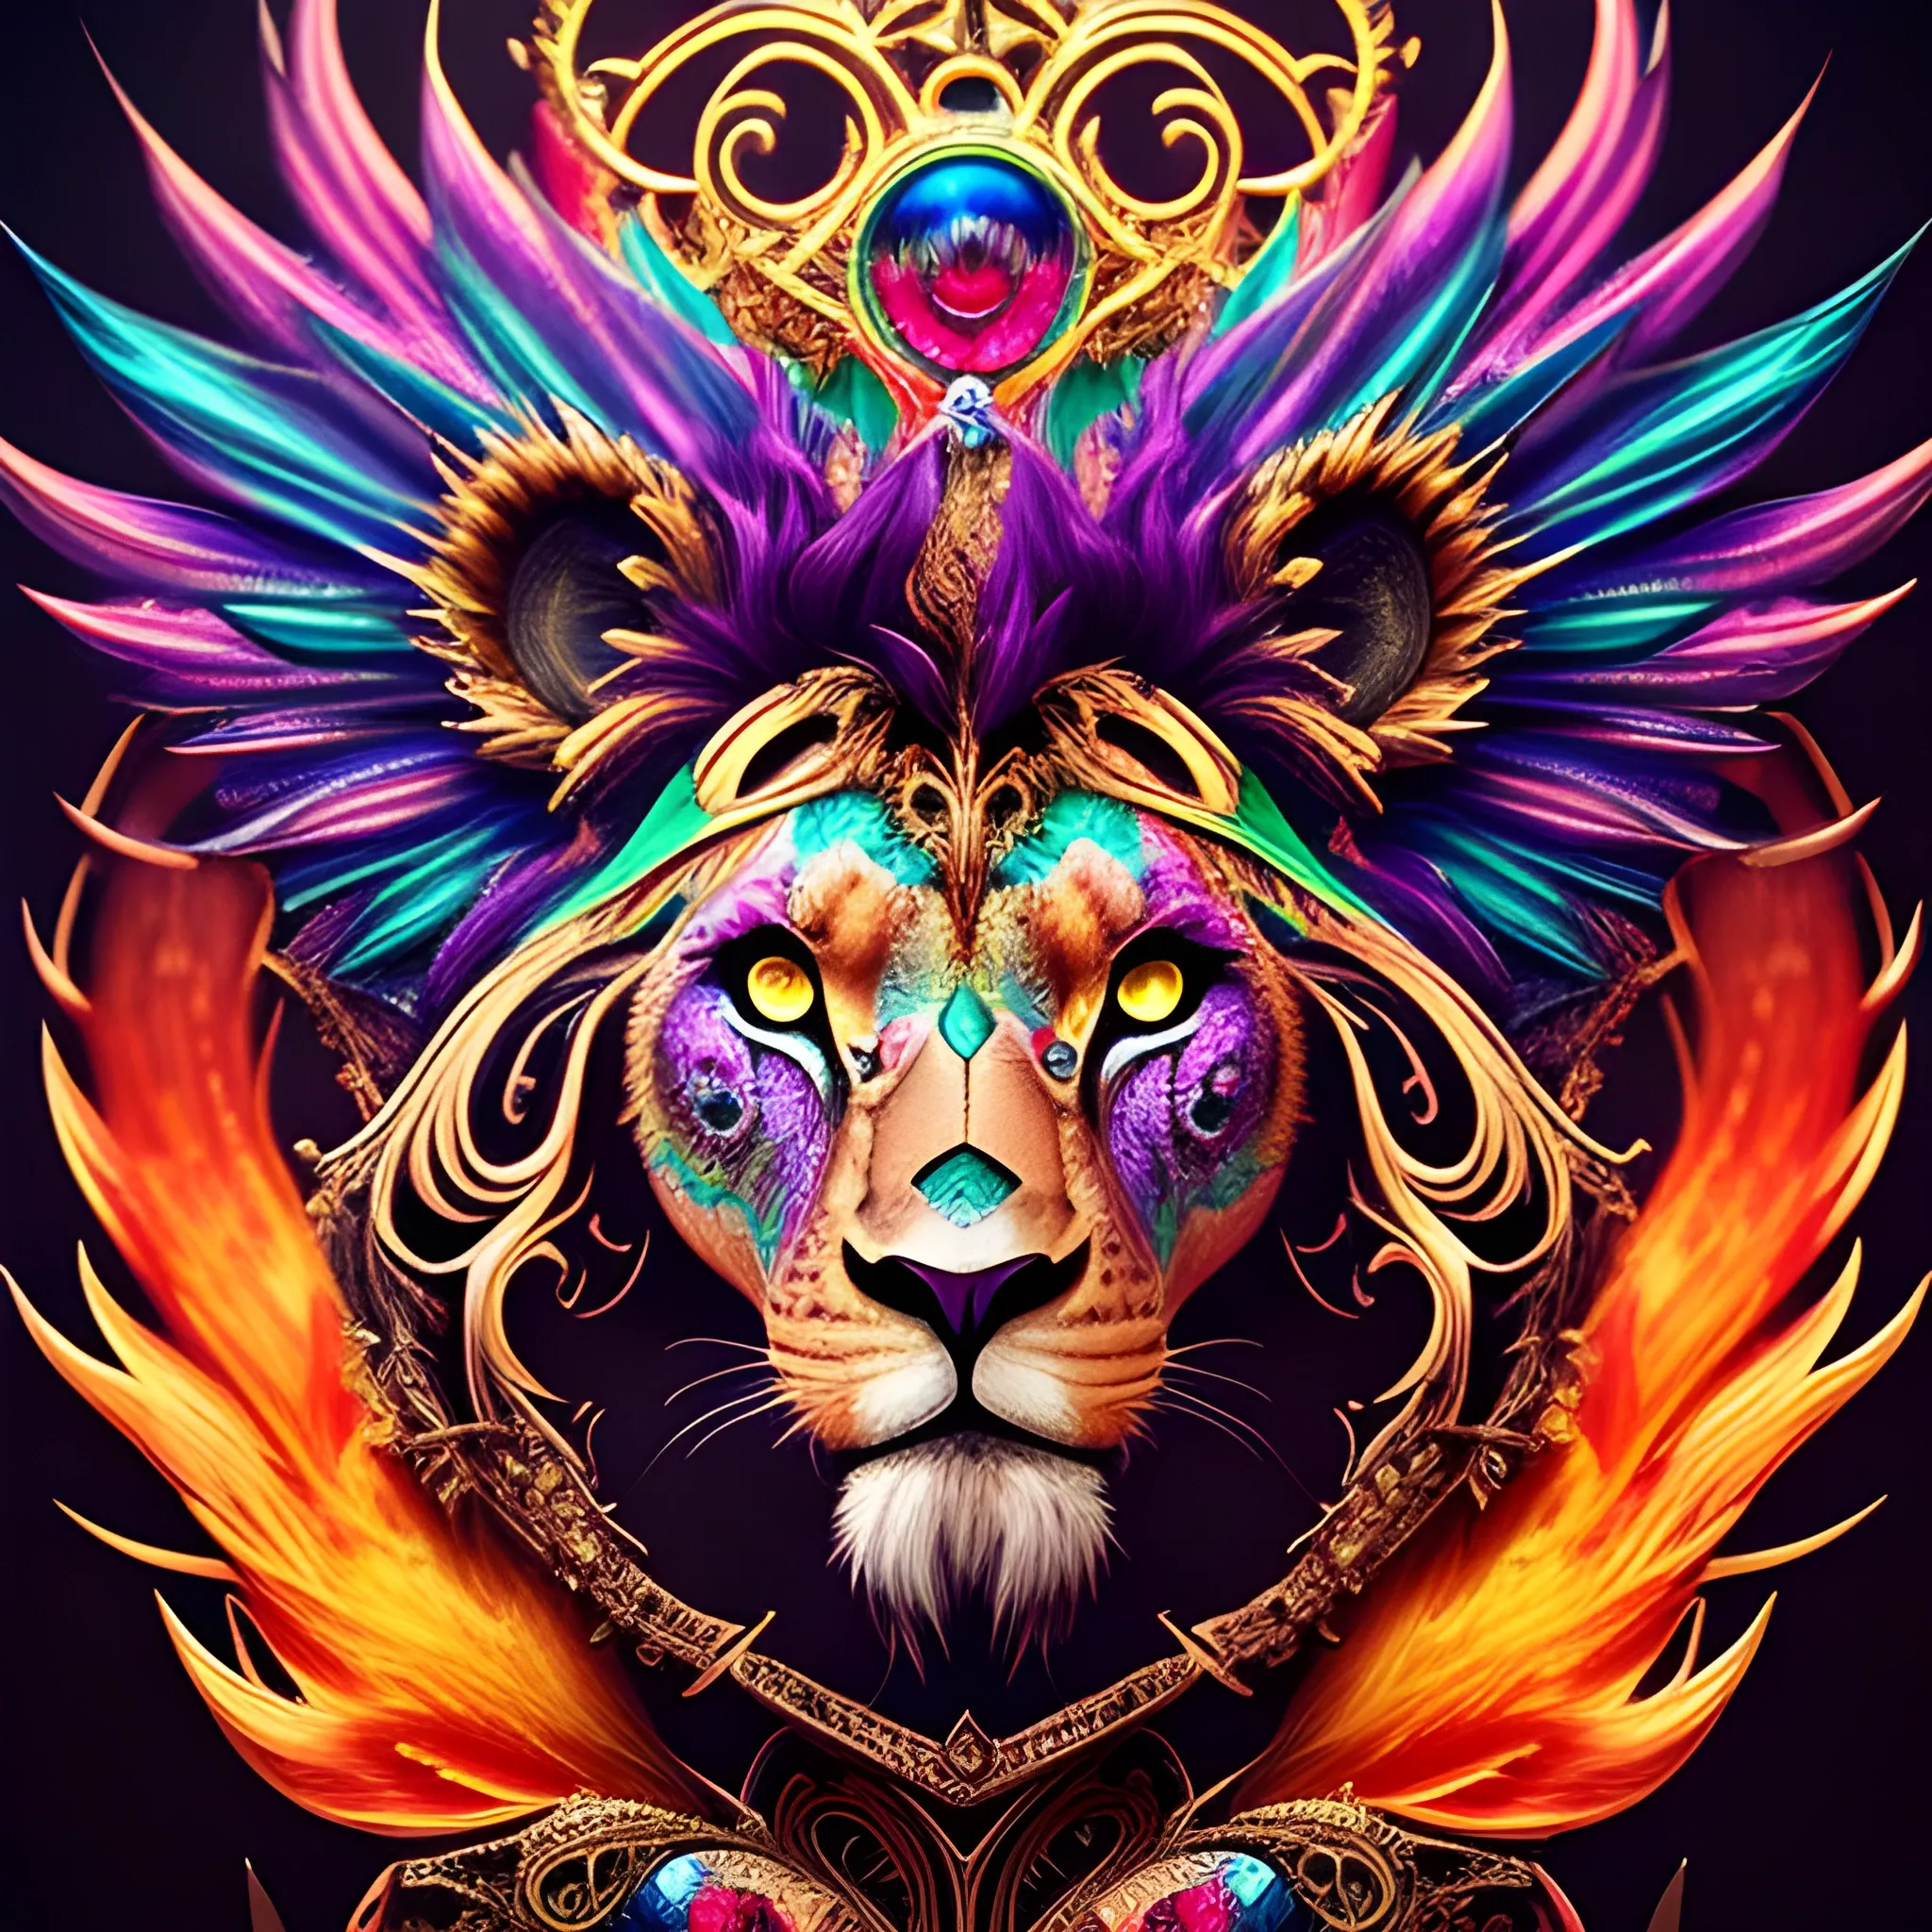 designer, the colorful  Lion head is on a black background, in the style of 8k resolution, colorful gradients, tim shumate, cute and colorful, massurrealism, magipunk,
charming characters, black background, fire psychedelic, cute eyes, dragon wings, bear claws, peacock feathers, filigree laser fractal details, glistening shiny scales, intricate ornate hypermaximalist sharp focus, dramatic lighting, highly detailed and intricate, hyper maximalist, ornate, photographic style, luxury, elite, haunting matte painting, cinematic, Trippy, 3D, 3D